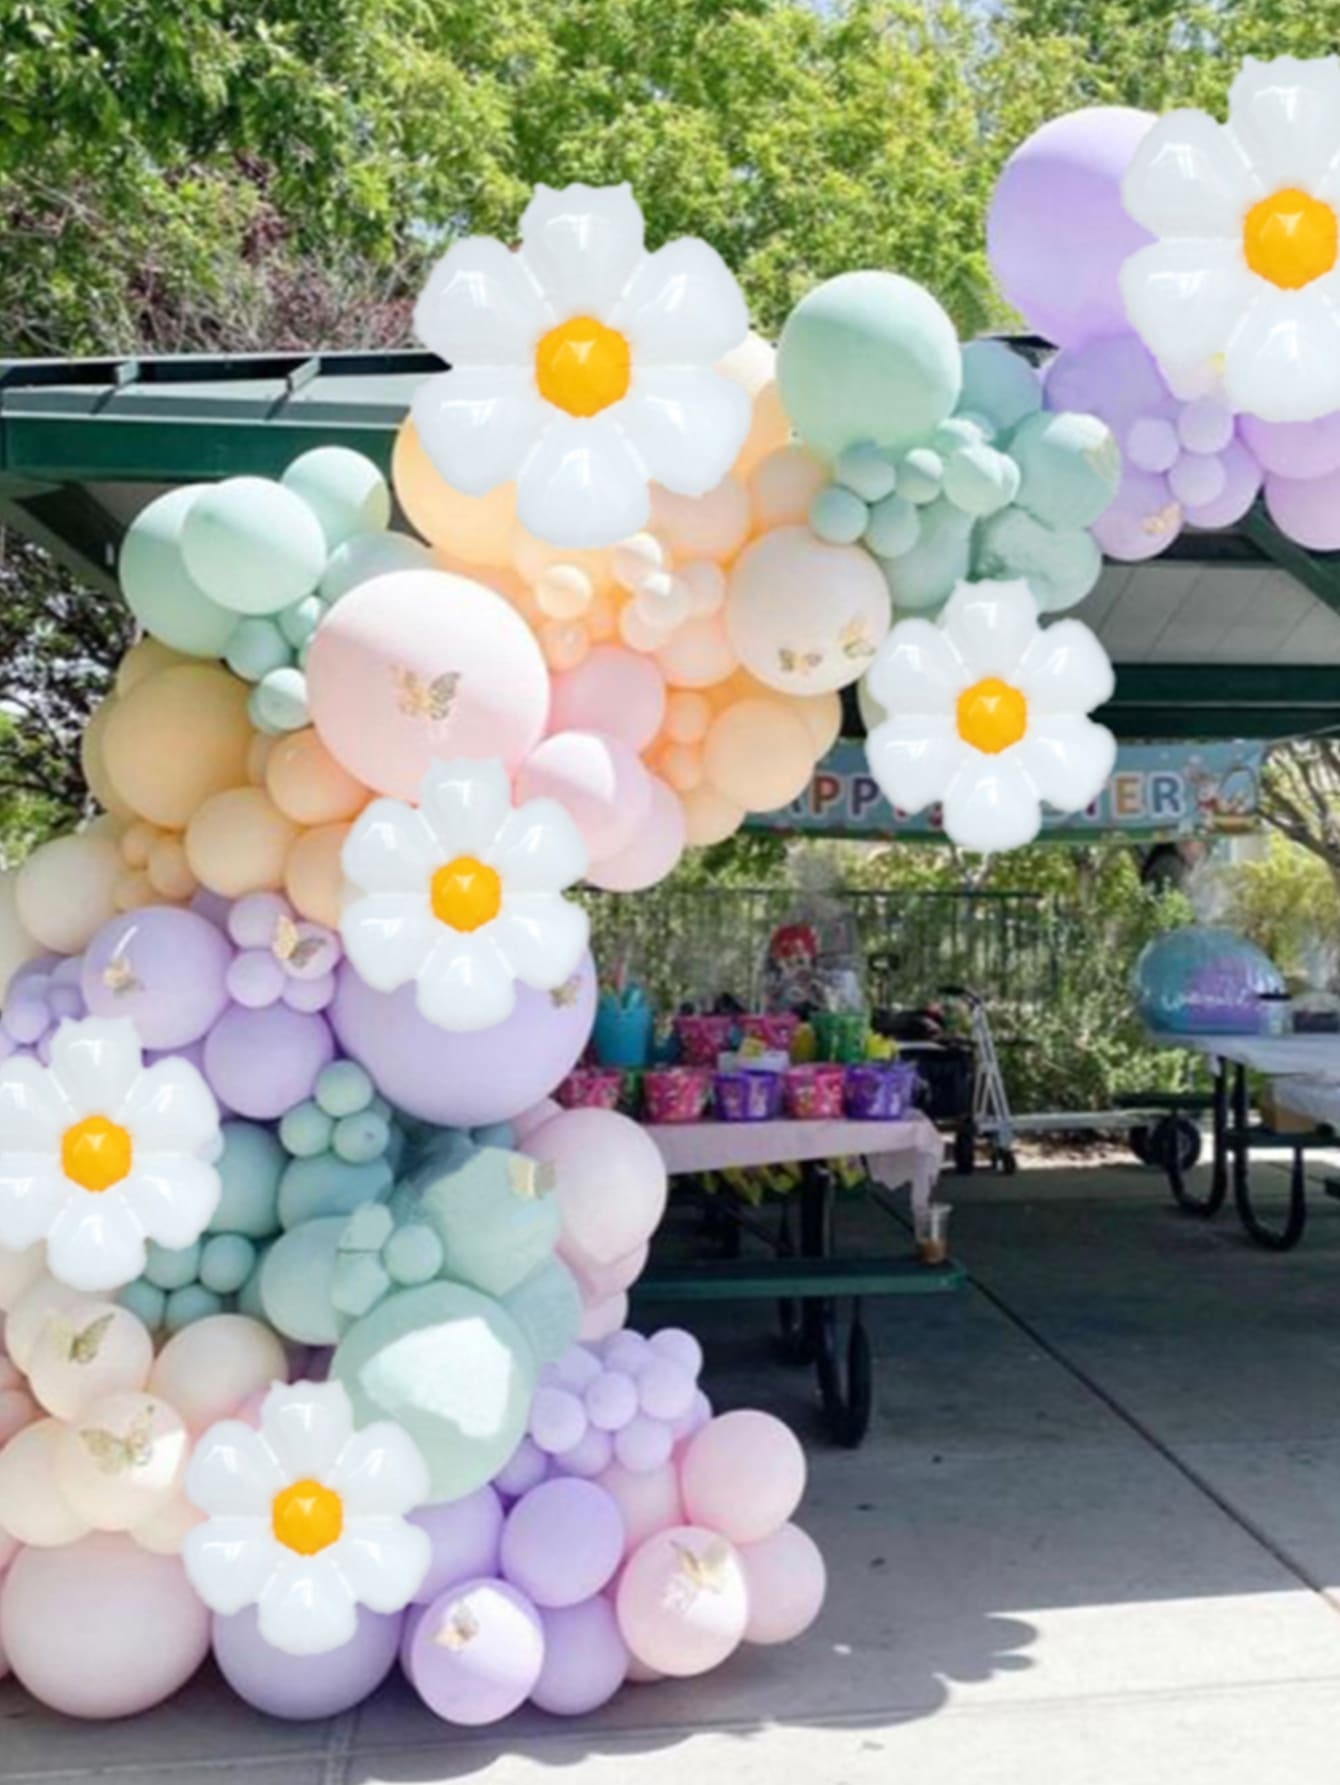 🔥Factory overstock - 141pcs/set Party Decorative Balloon Arch Kit, Colorful Balloon Garland For Party